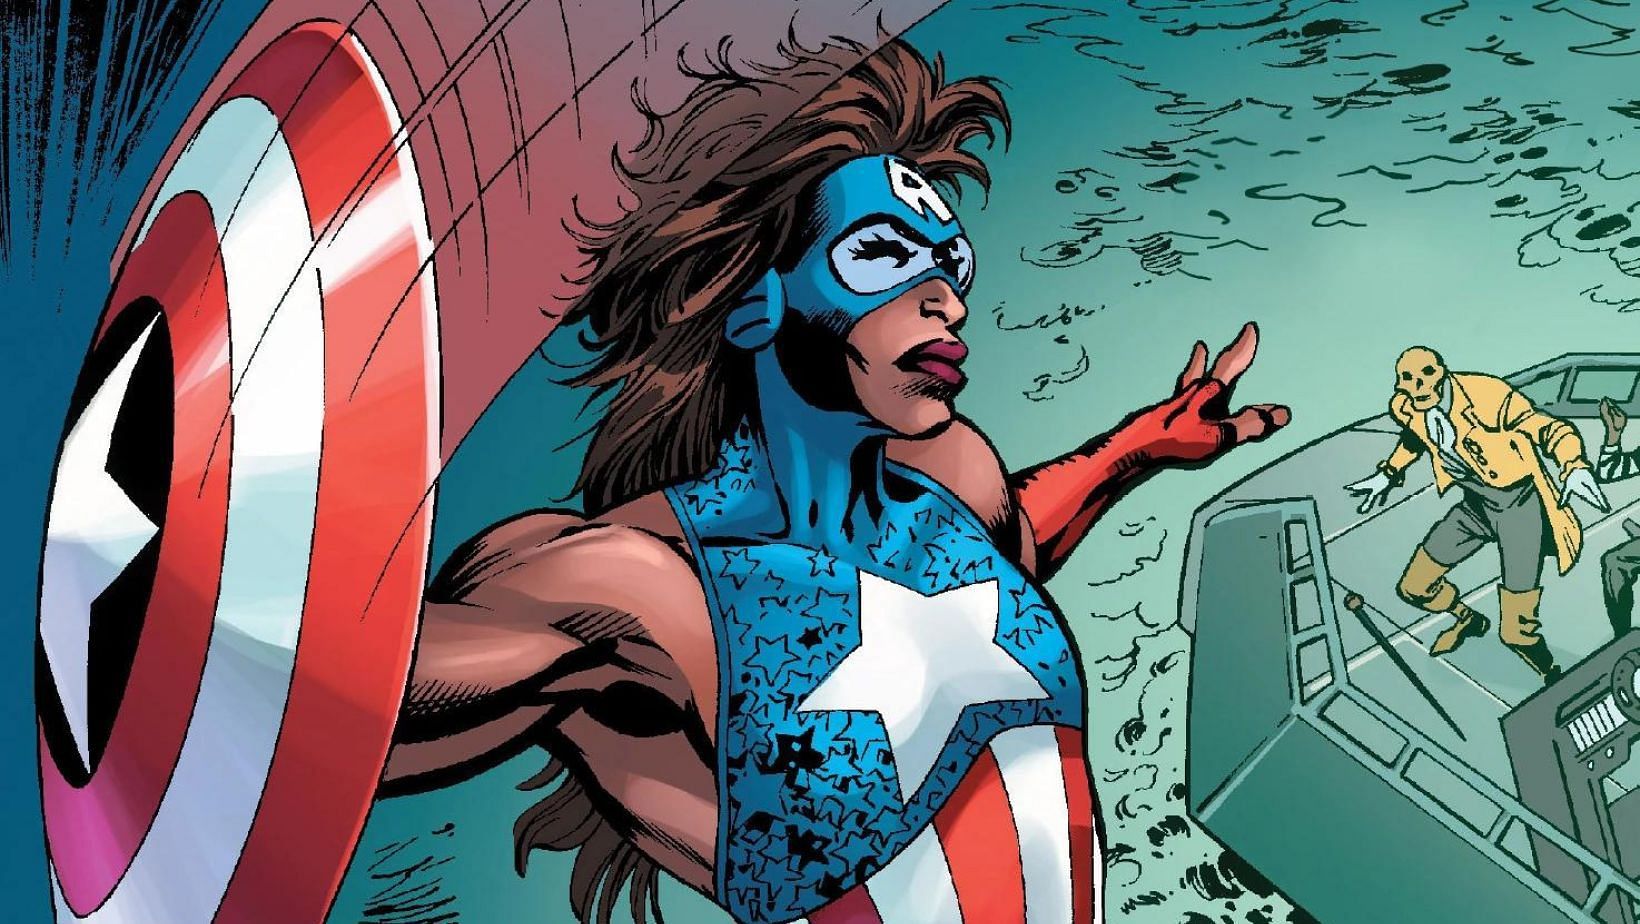 Daughter of Luke Cage and Jessica Jones who becomes Captain America in an alternate future. (Image via Marvel Comics)